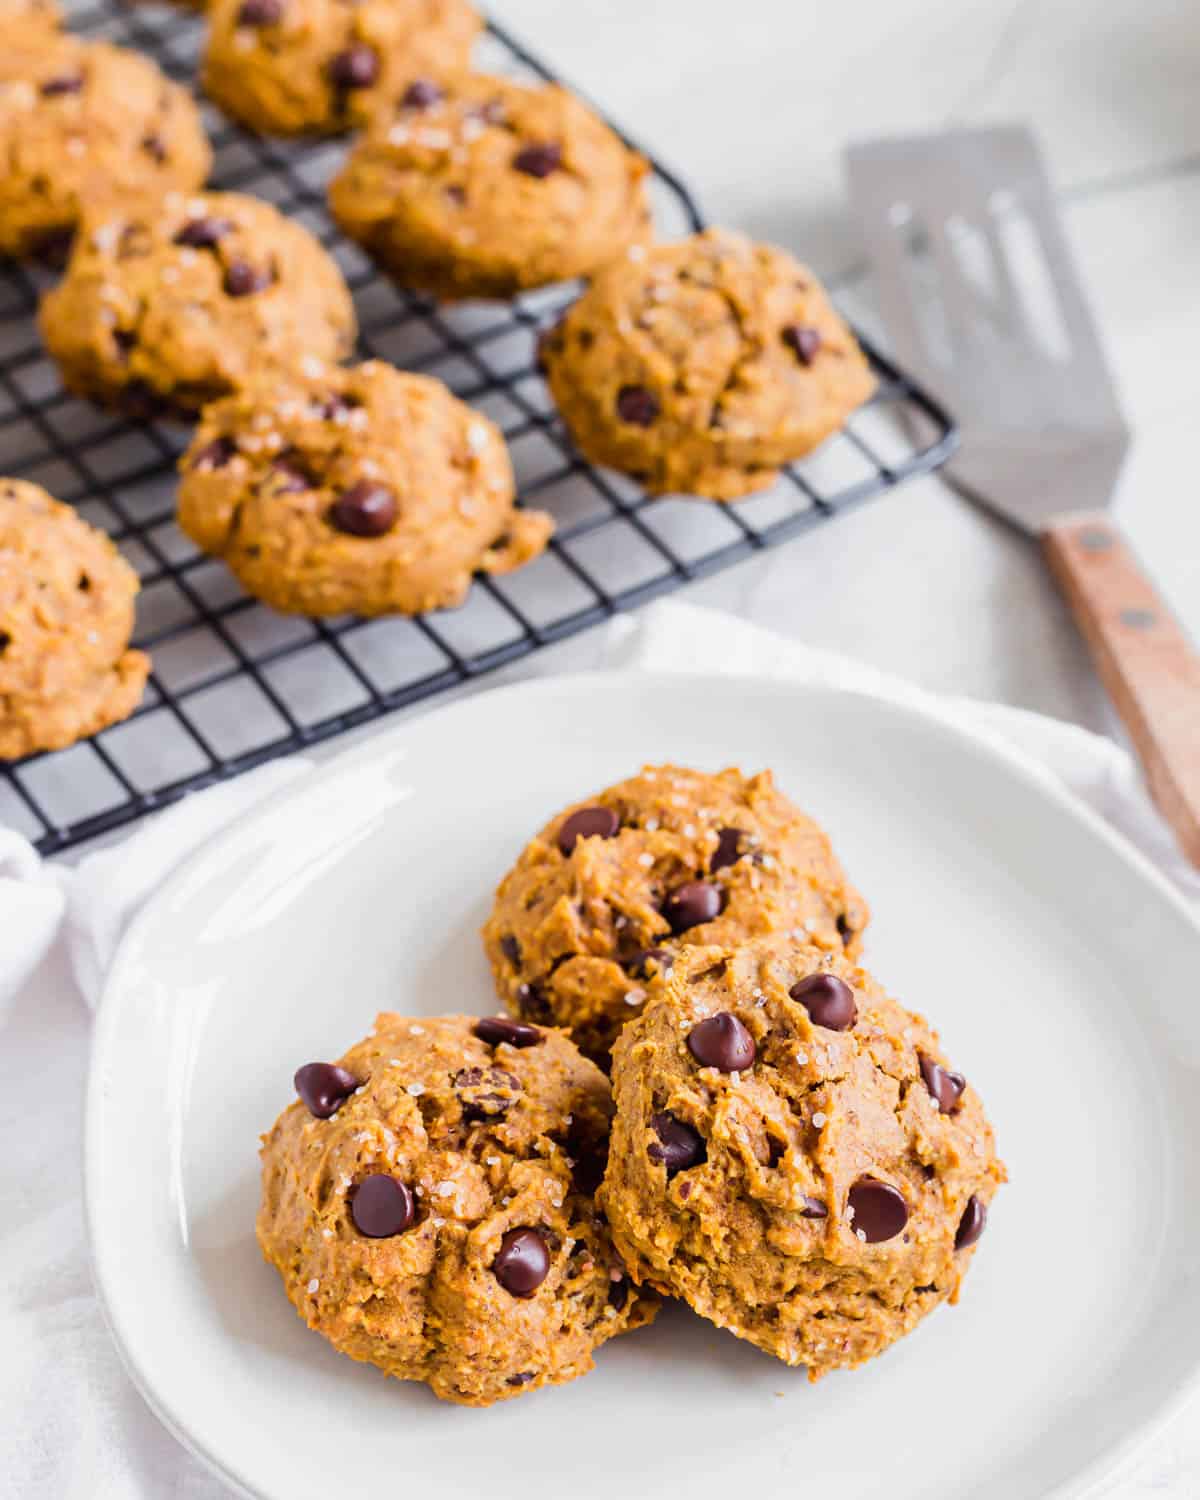 Three chewy vegan chocolate chip pumpkin cookies on plate with more cookies on a cooling rack in the background.